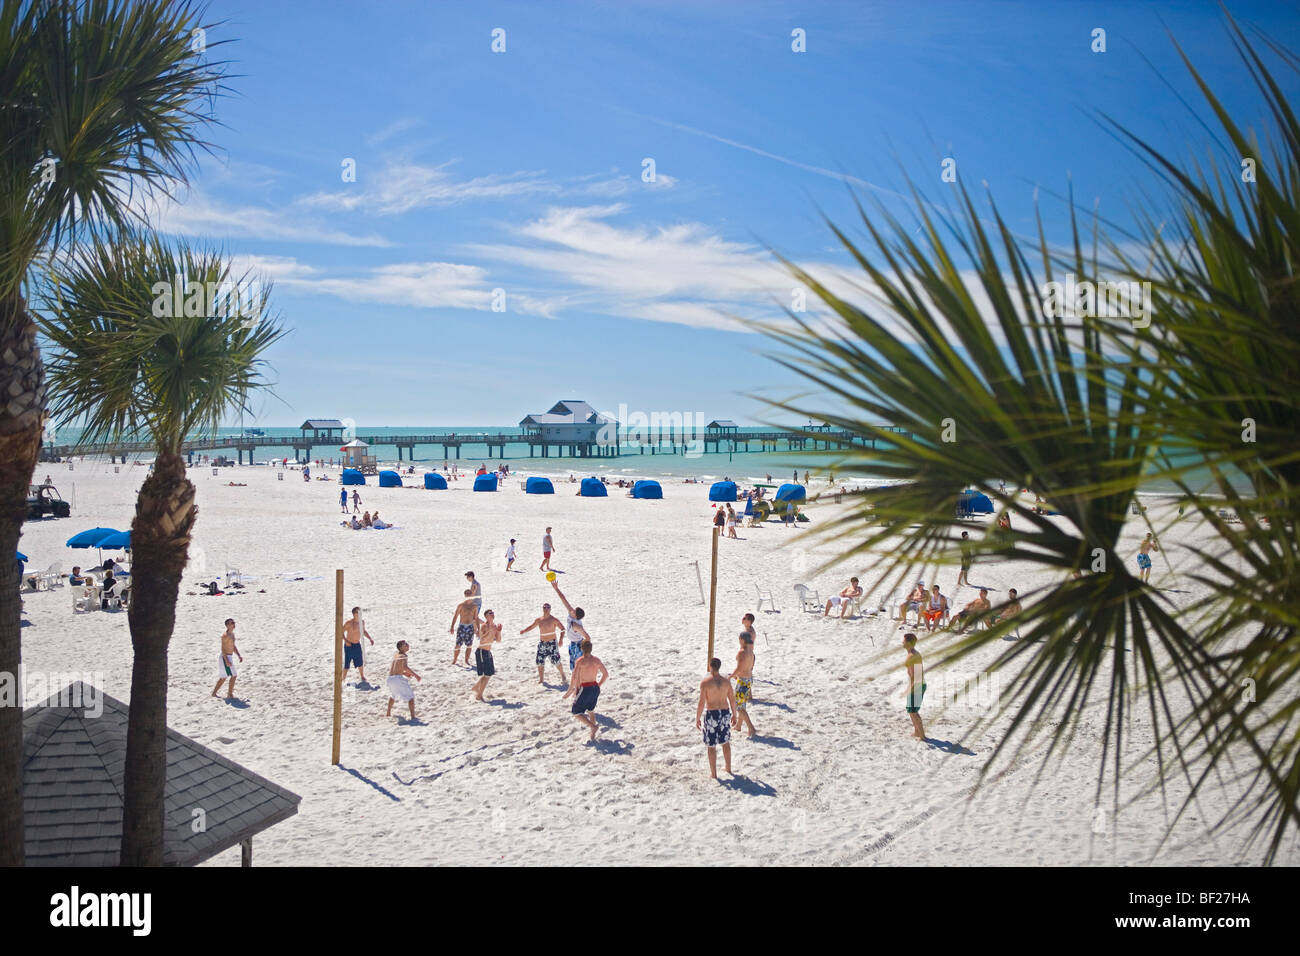 People playing beach volleyball at Clearwater Beach, Tampa Bay, Florida, USA Stock Photo